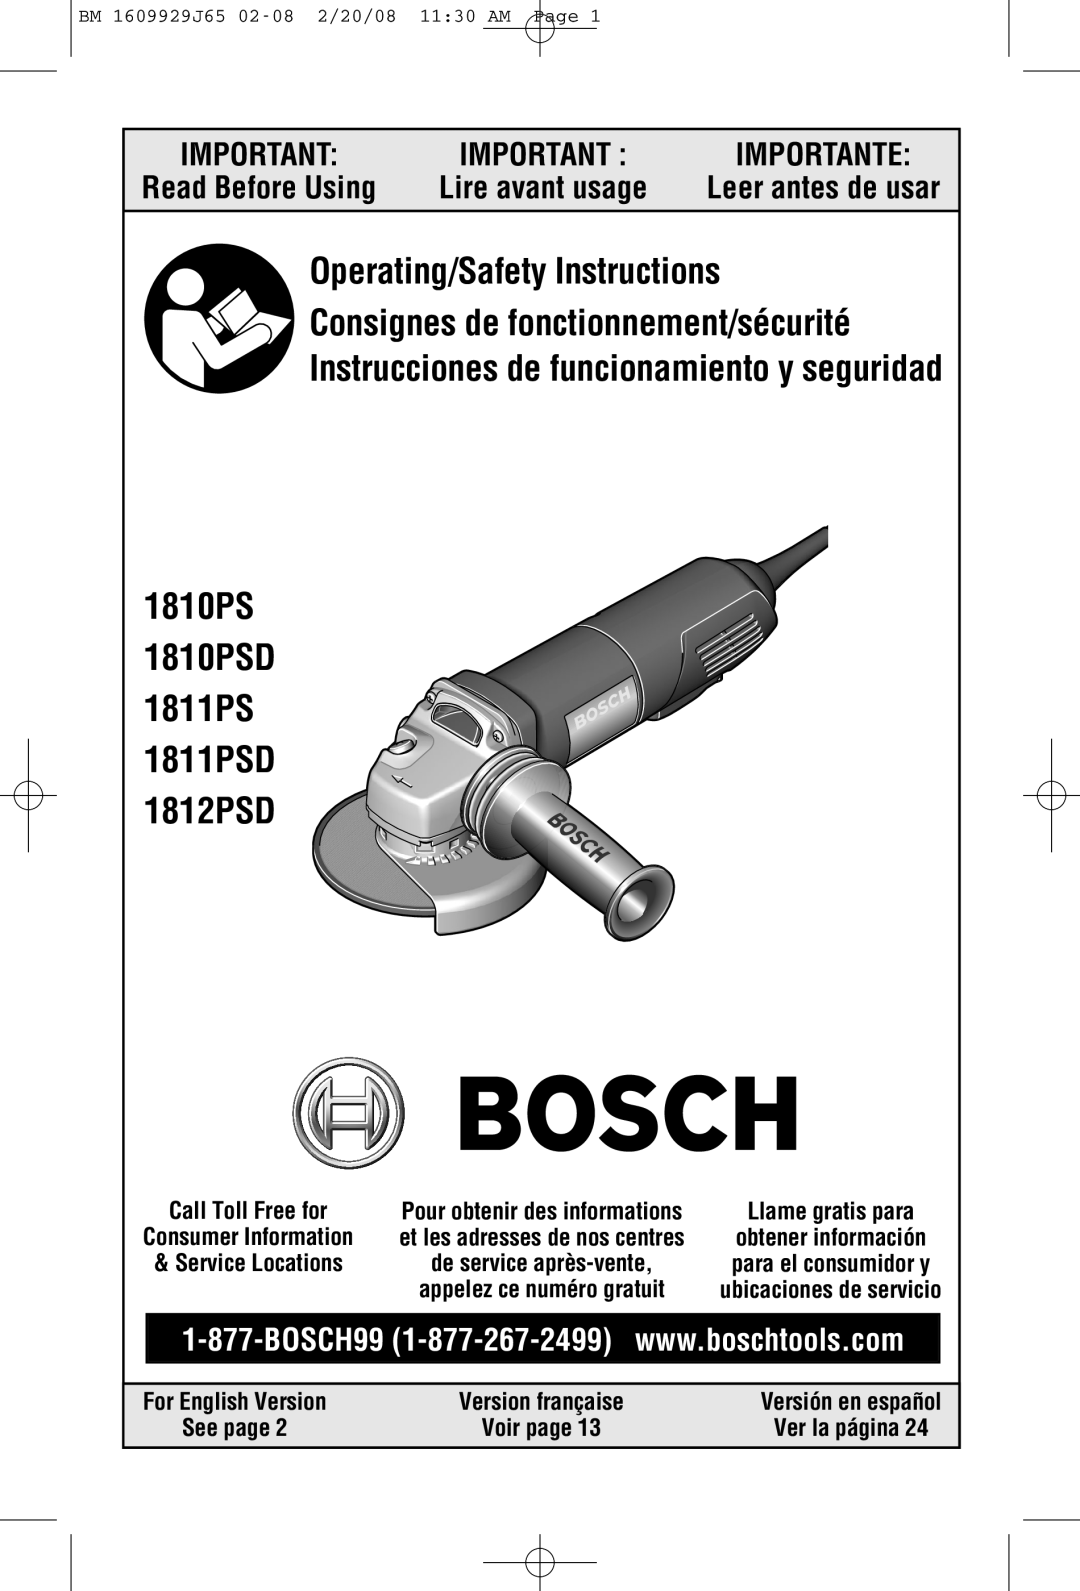 Bosch Power Tools 1811PS manual Read Before Using, Lire avant usage, Leer antes de usar, Call Toll Free for, See page 